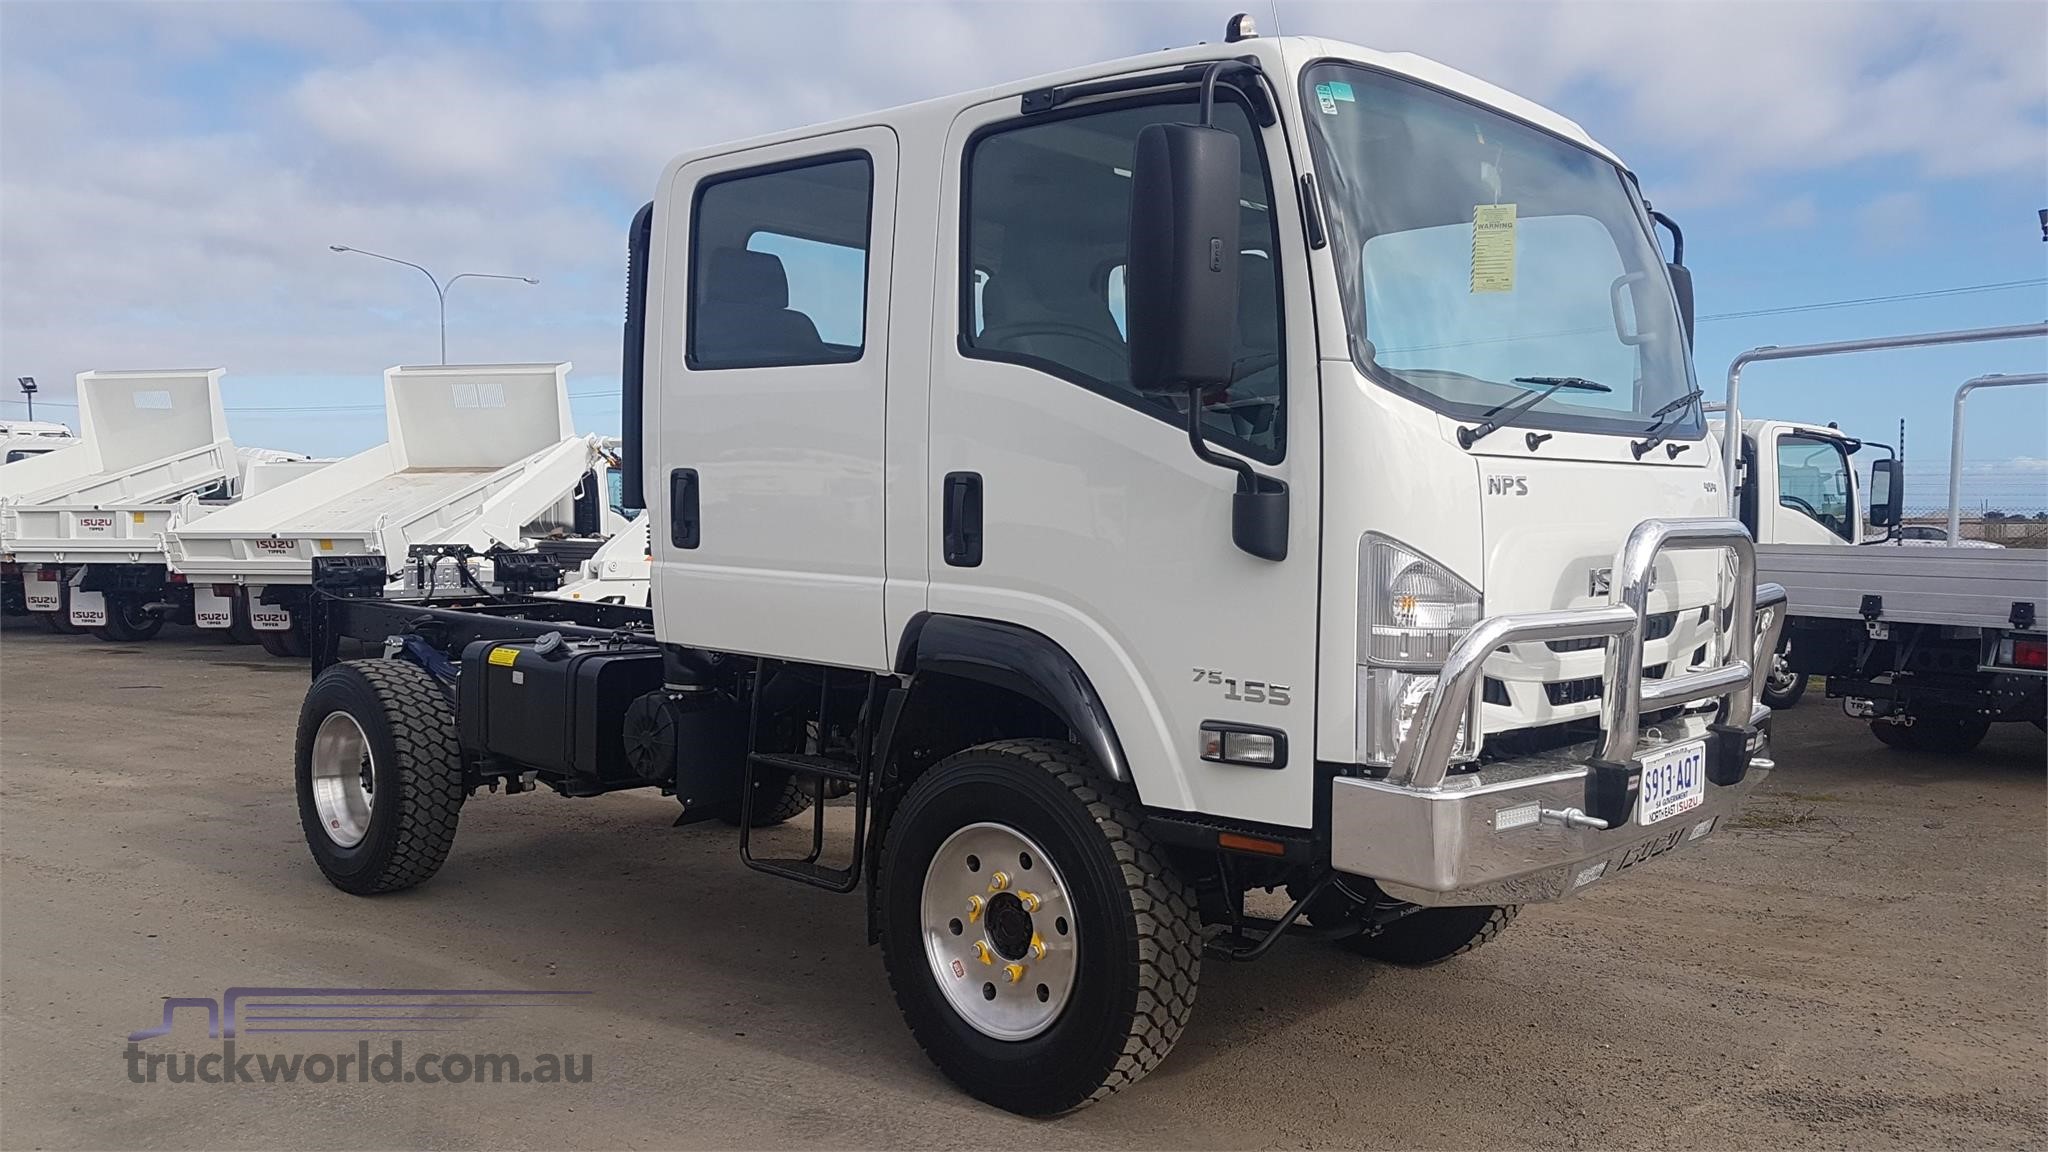 2017 Isuzu NPS 75/45 155 Crew 4x4 Cab Chassis truck for sale North East